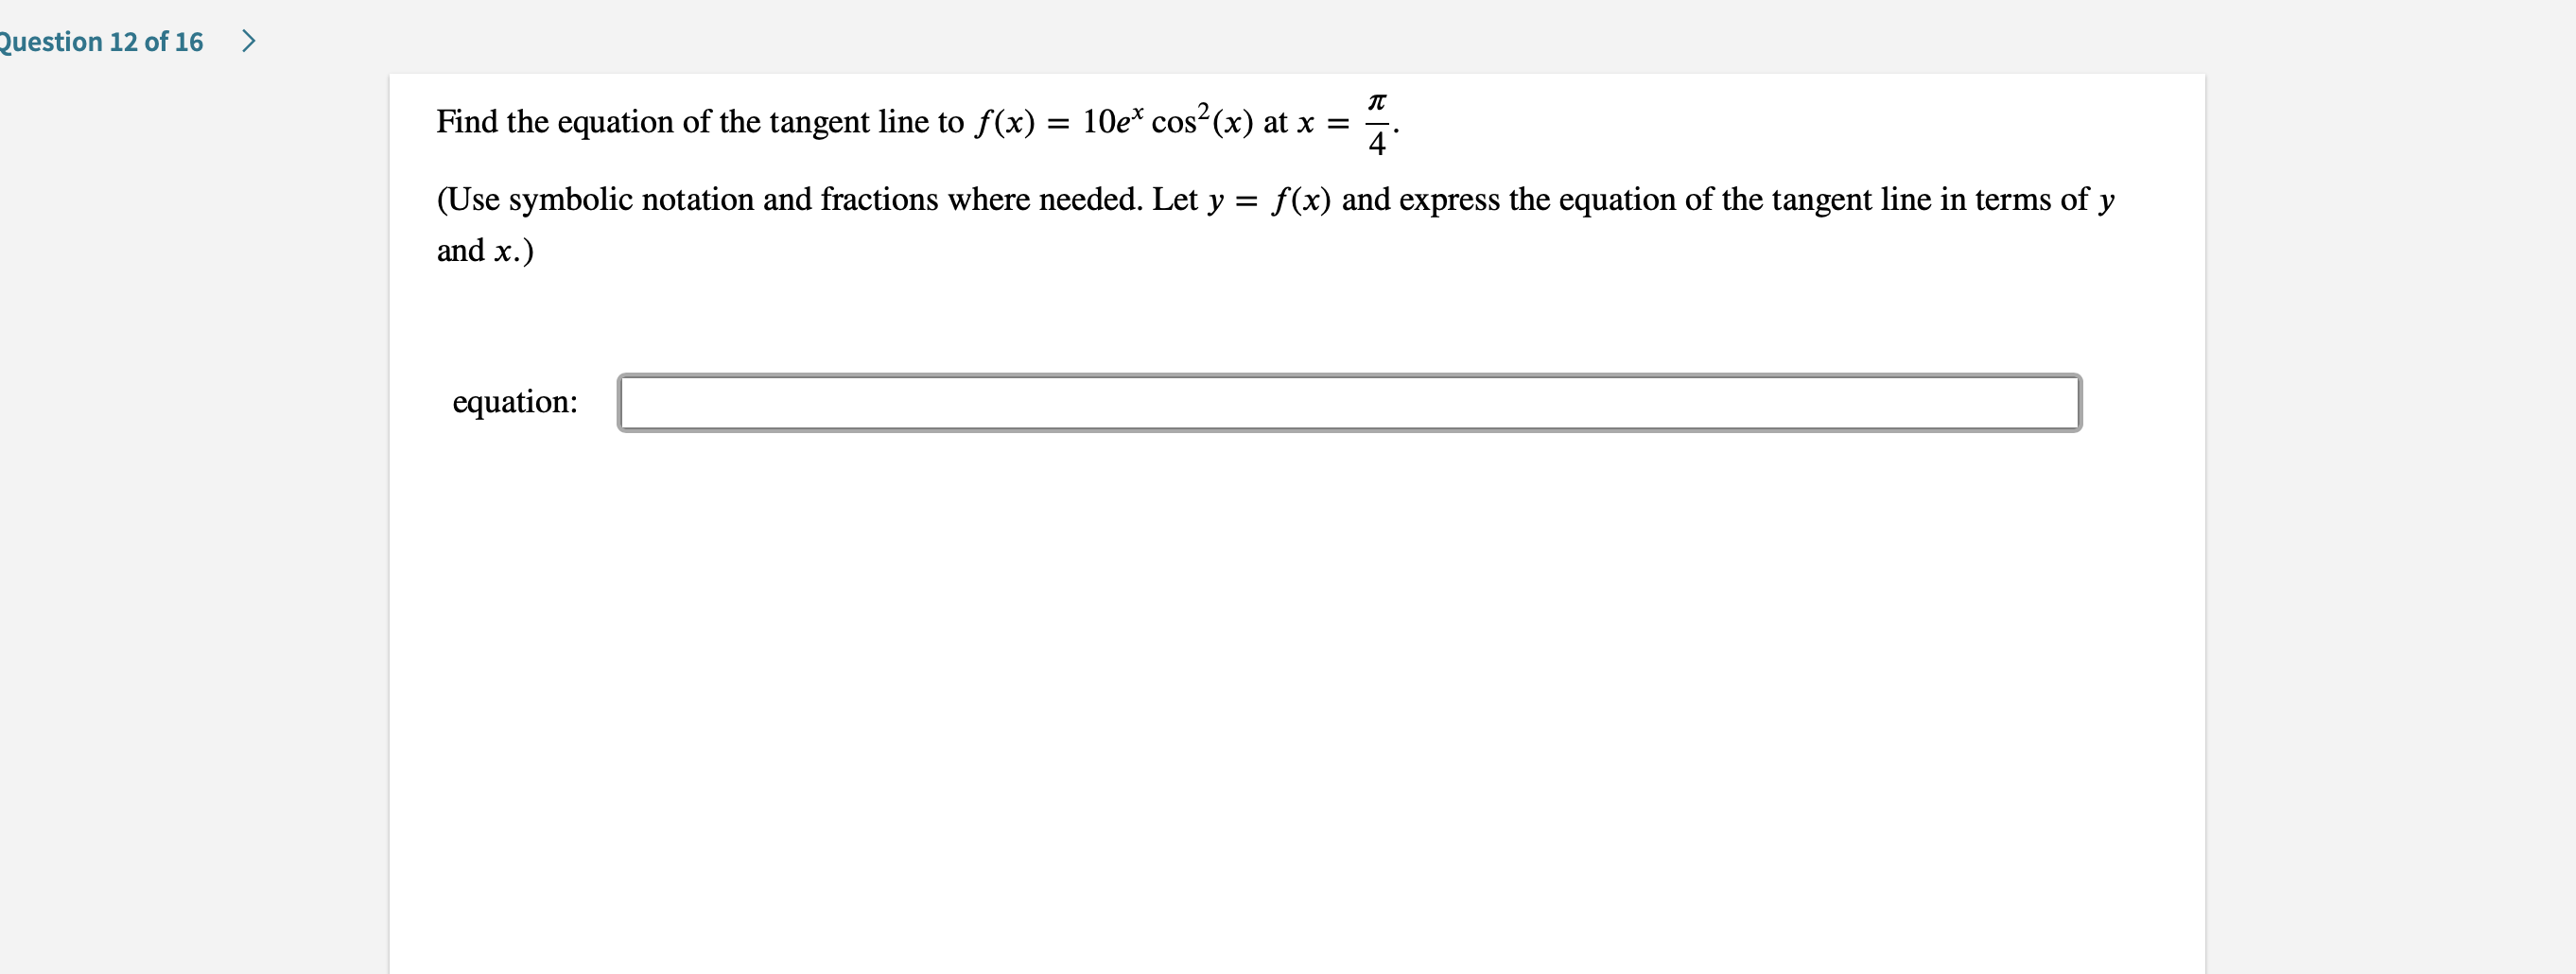 Question 12 of 16
>
Find the equation of the tangent line to f(x) = 10e* cos2(x) at x
4
(Use symbolic notation and fractions where needed. Let y f(x) and express the equation of the tangent line in terms of y
=
and x.)
equation
